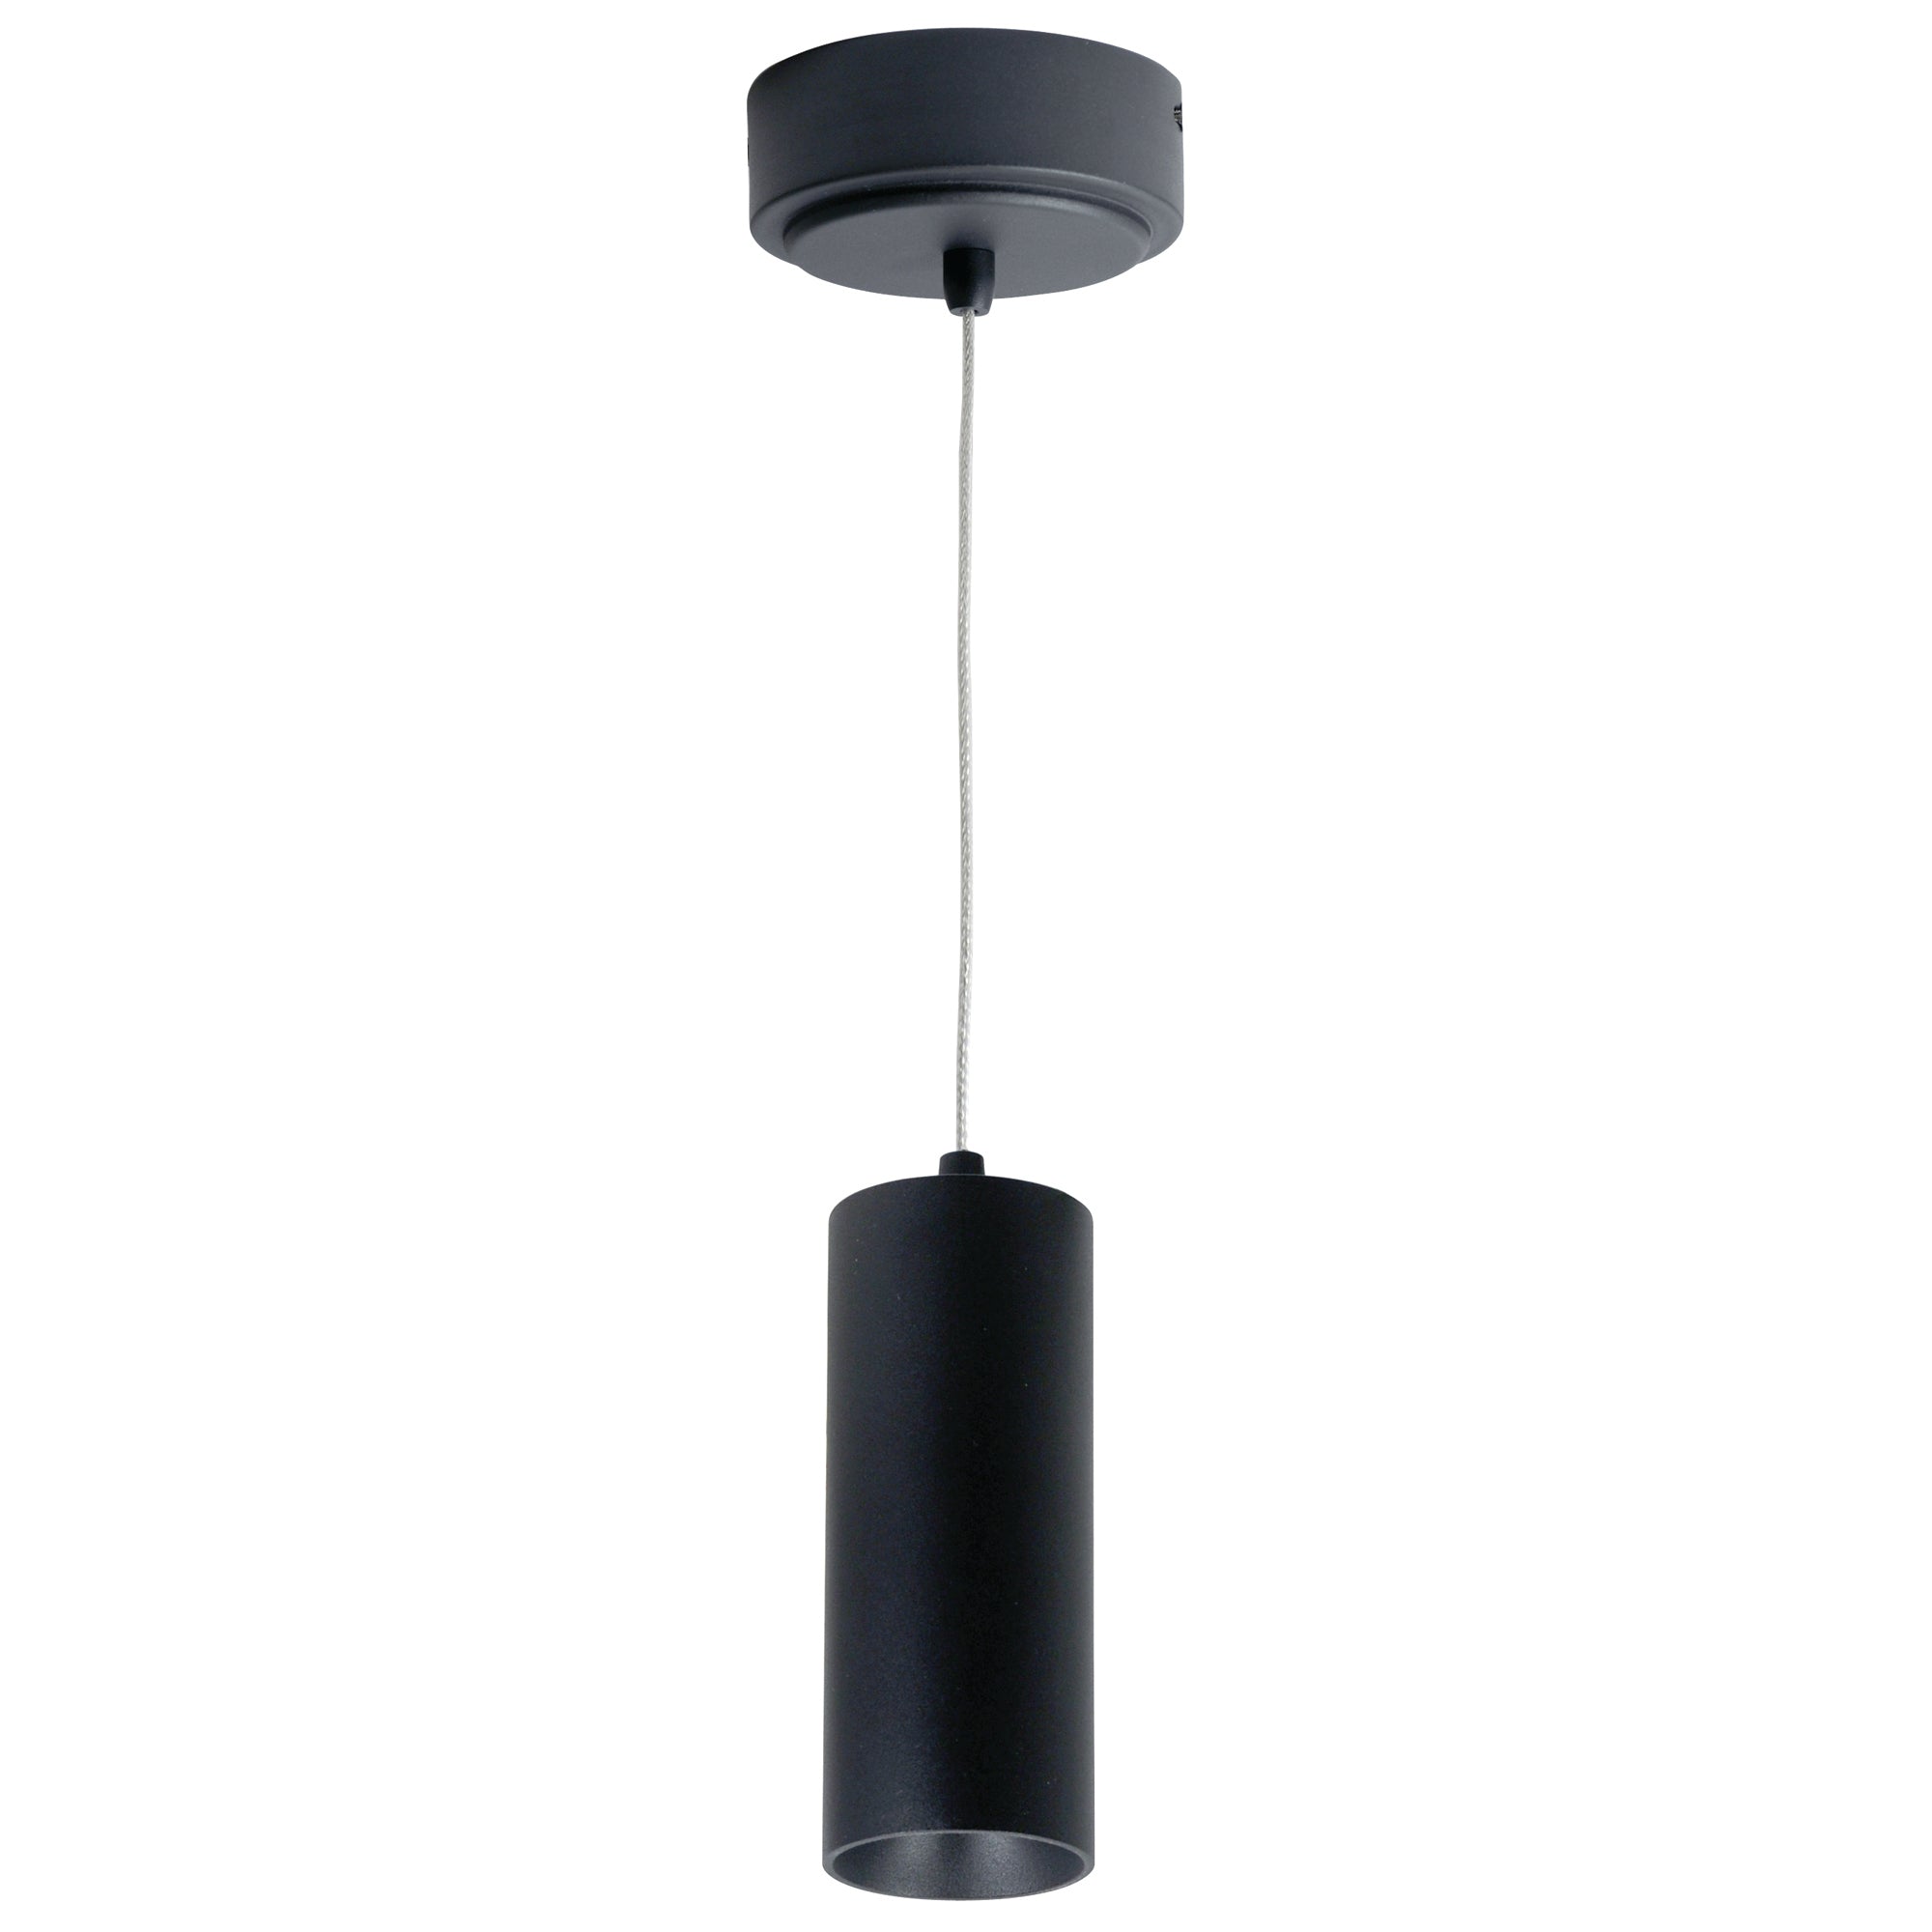 Nora Lighting LE56 - NYLM-2C40XBBLE3A - Cylinder - Black